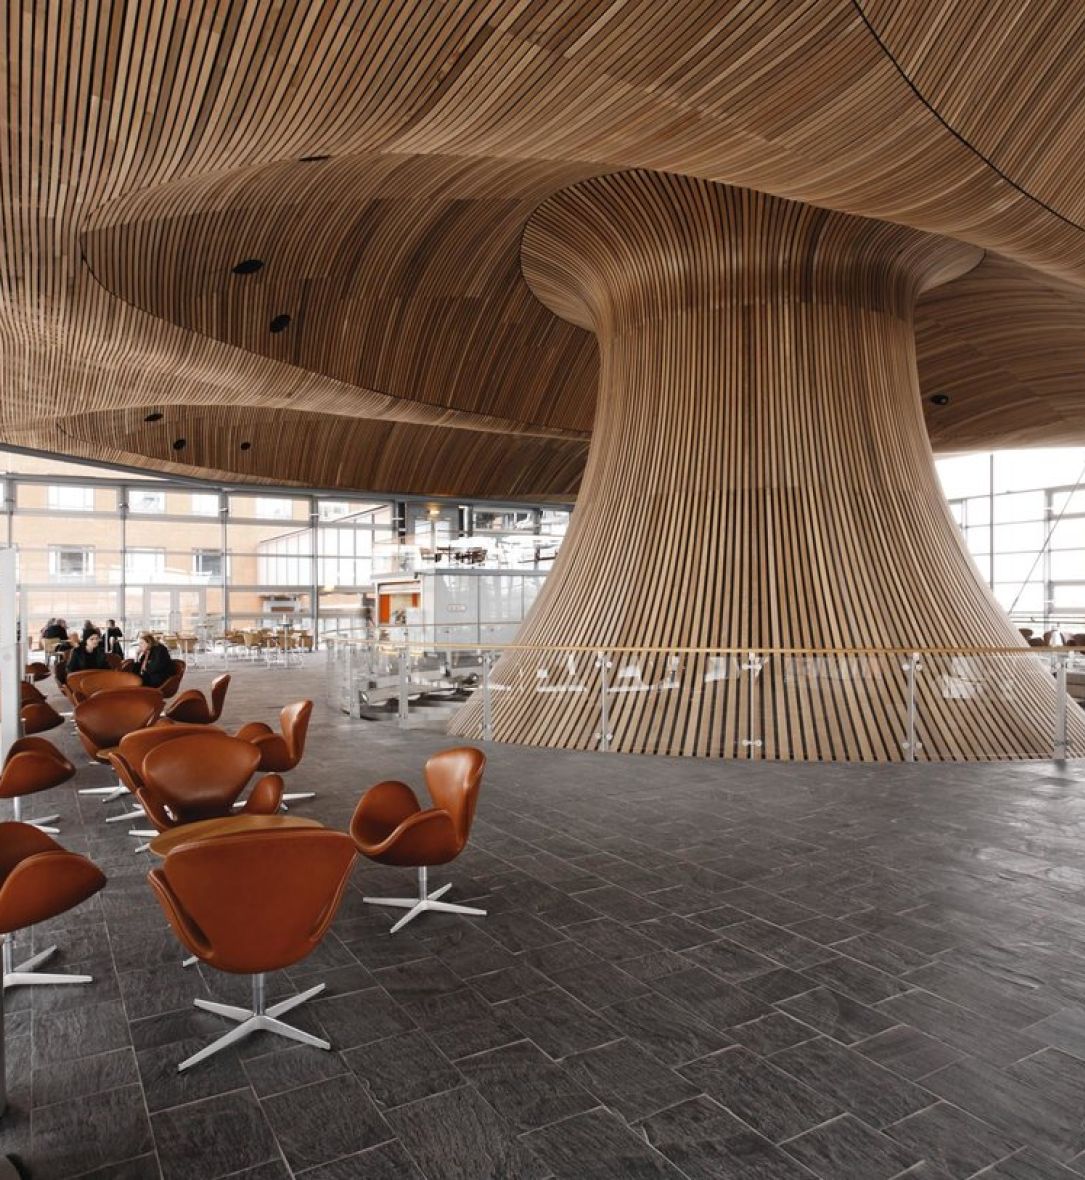 BCL wood ceilings installed at The Welsh Assembly in Cardiff